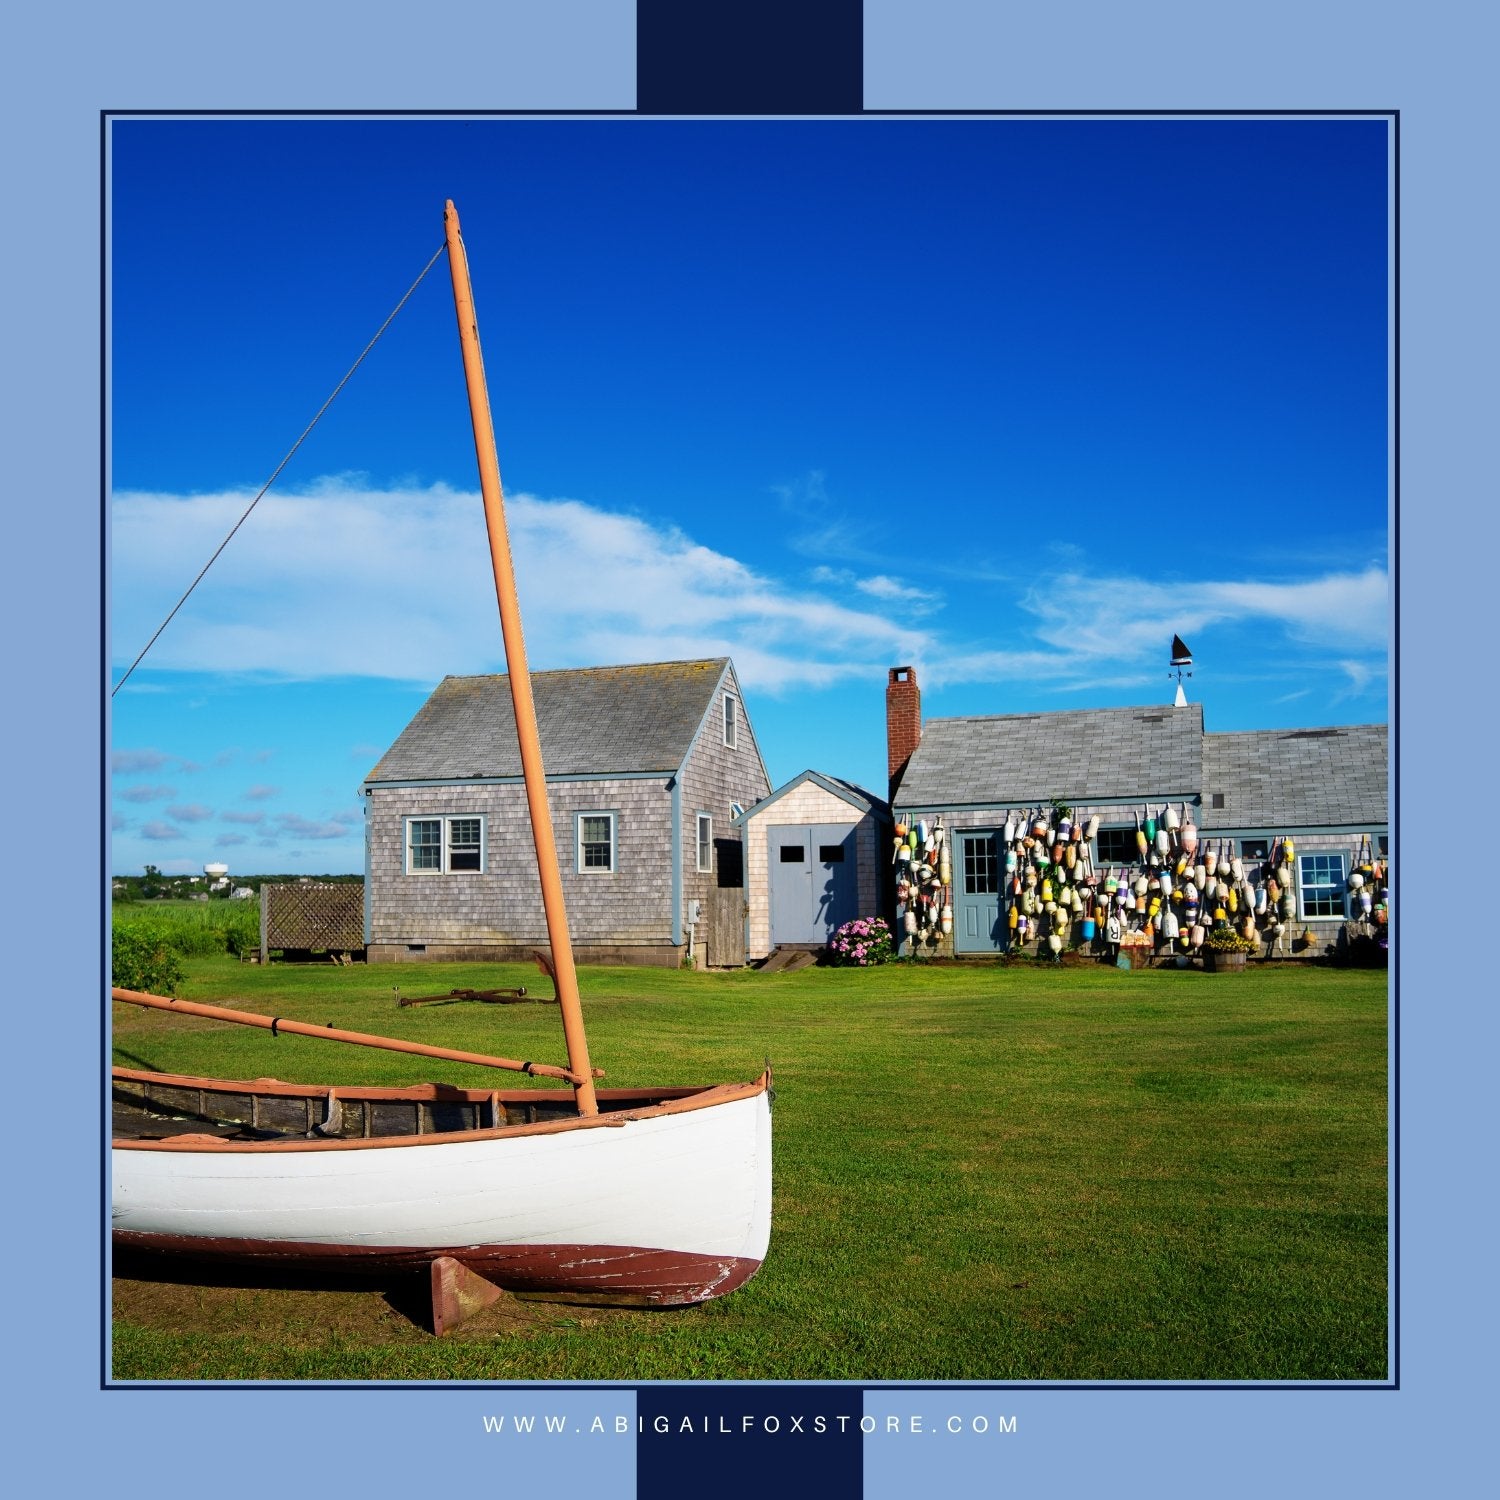 5 Things To Do In Nantucket - Abigail Fox Designs